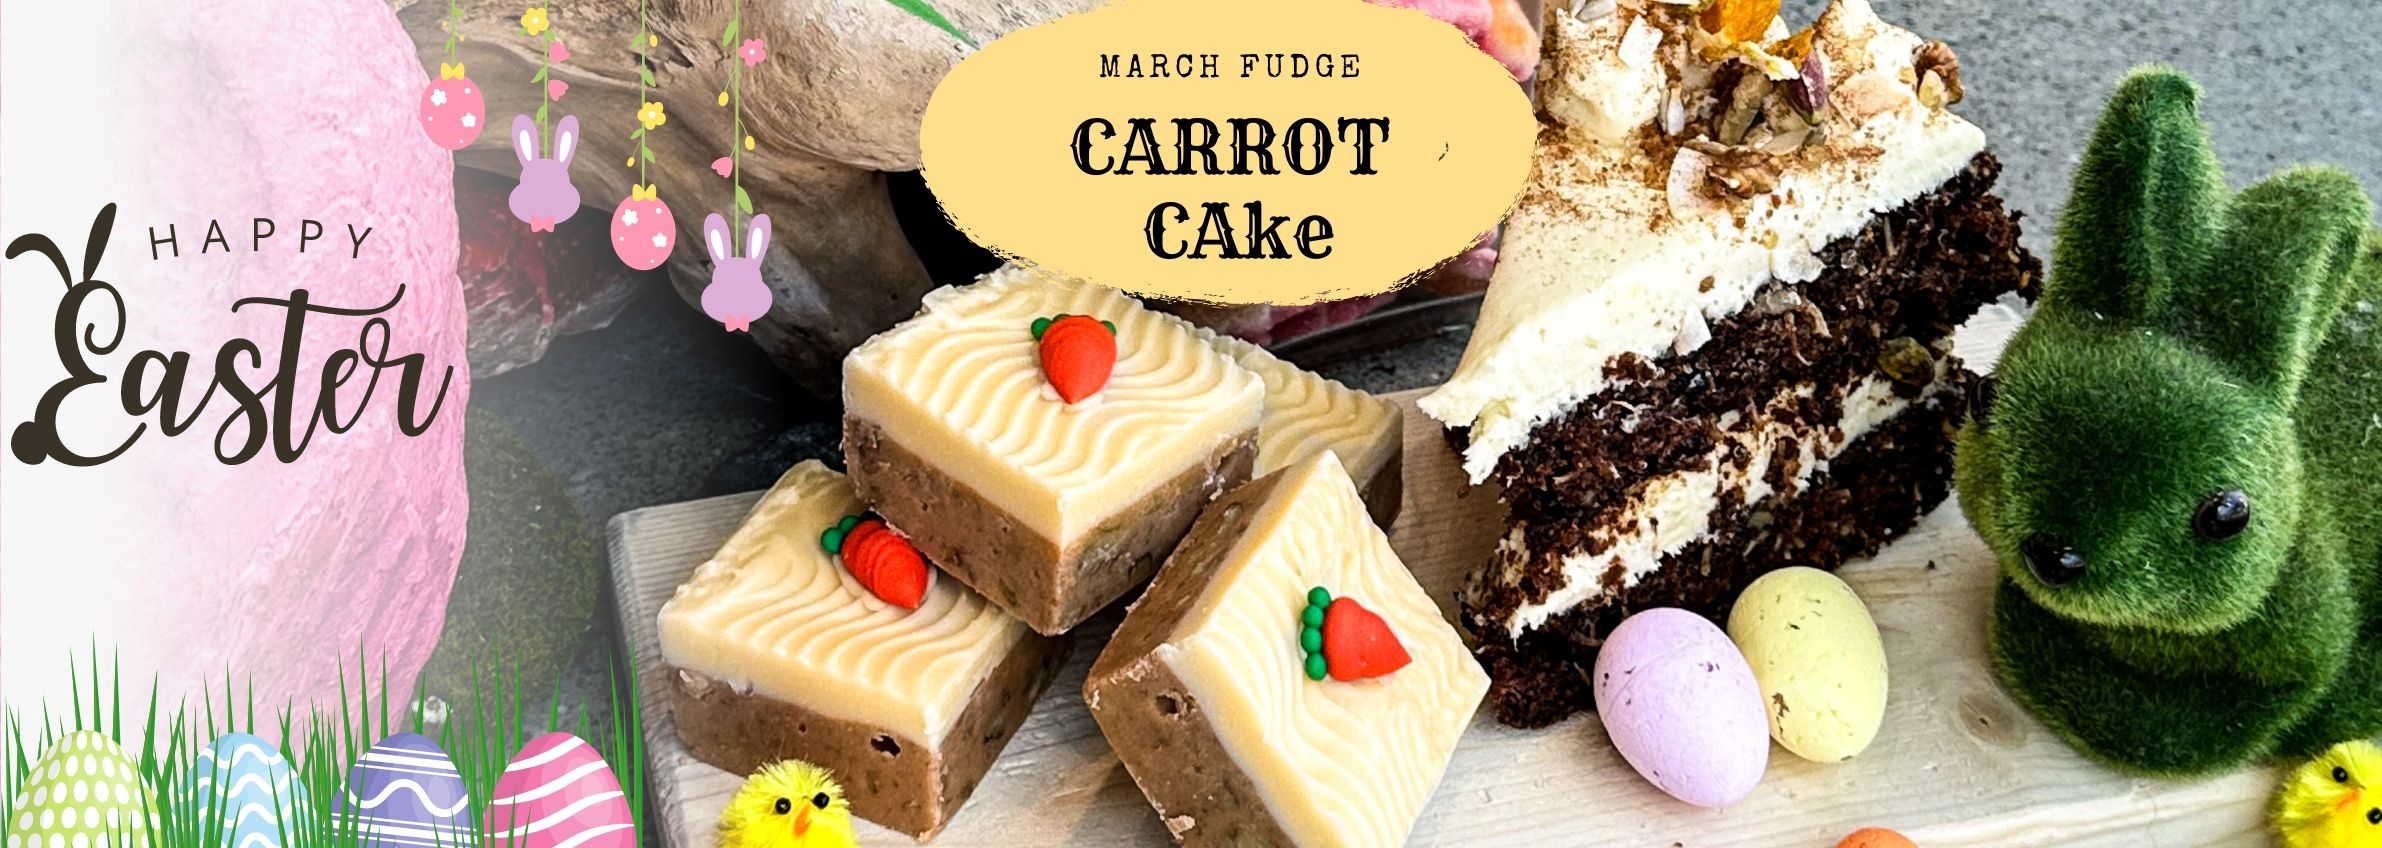 March Easter Fudge Carrot Cake